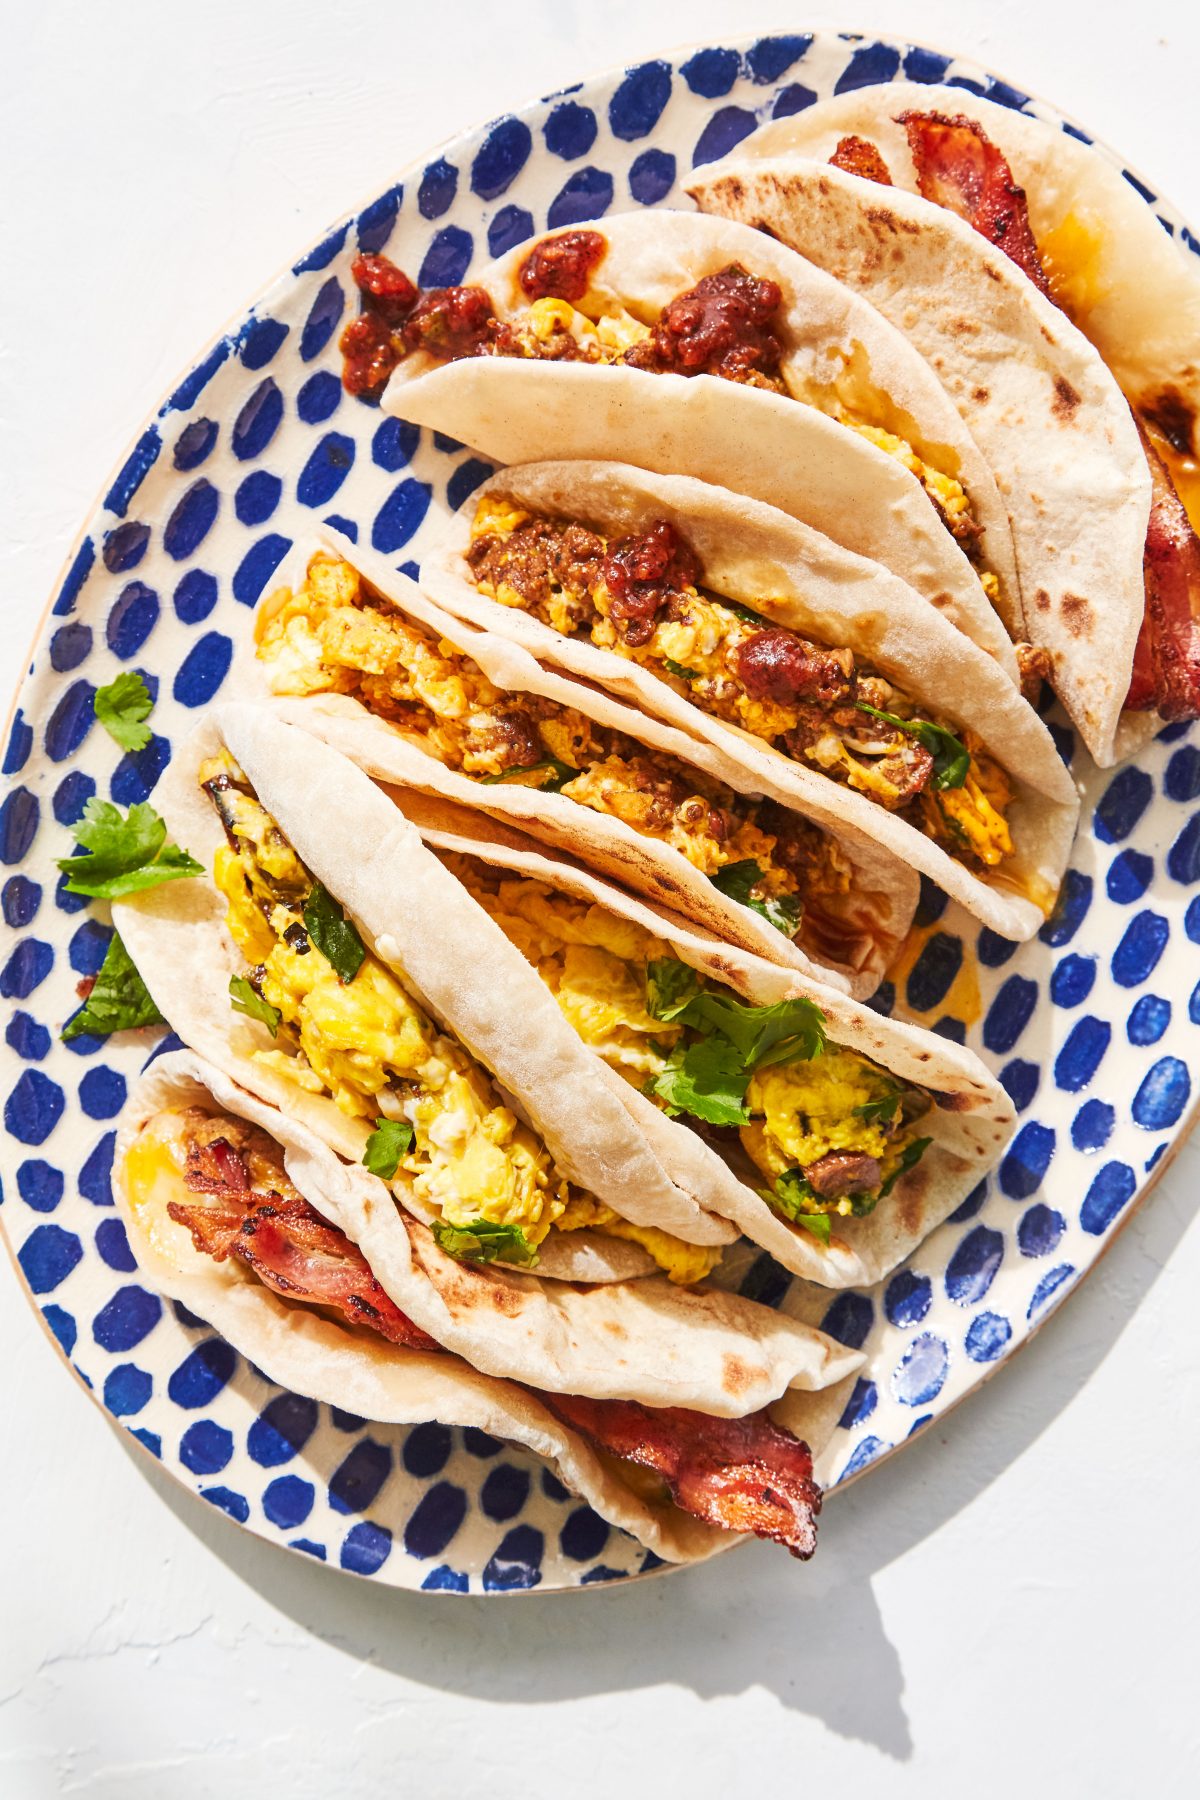 Learn how to make breakfast tacos from "Ama." Photo by Ren Fuller.